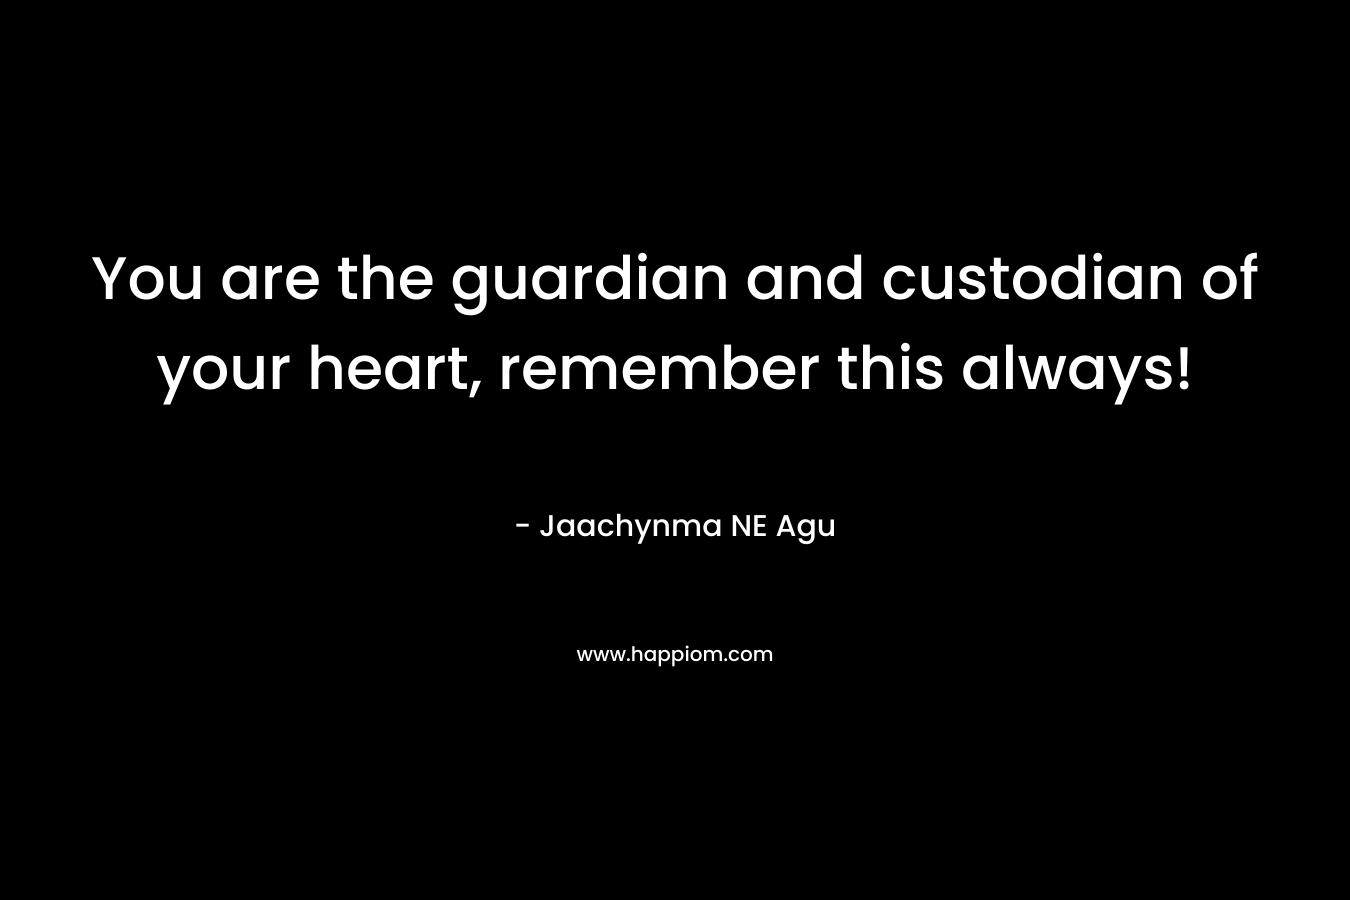 You are the guardian and custodian of your heart, remember this always!